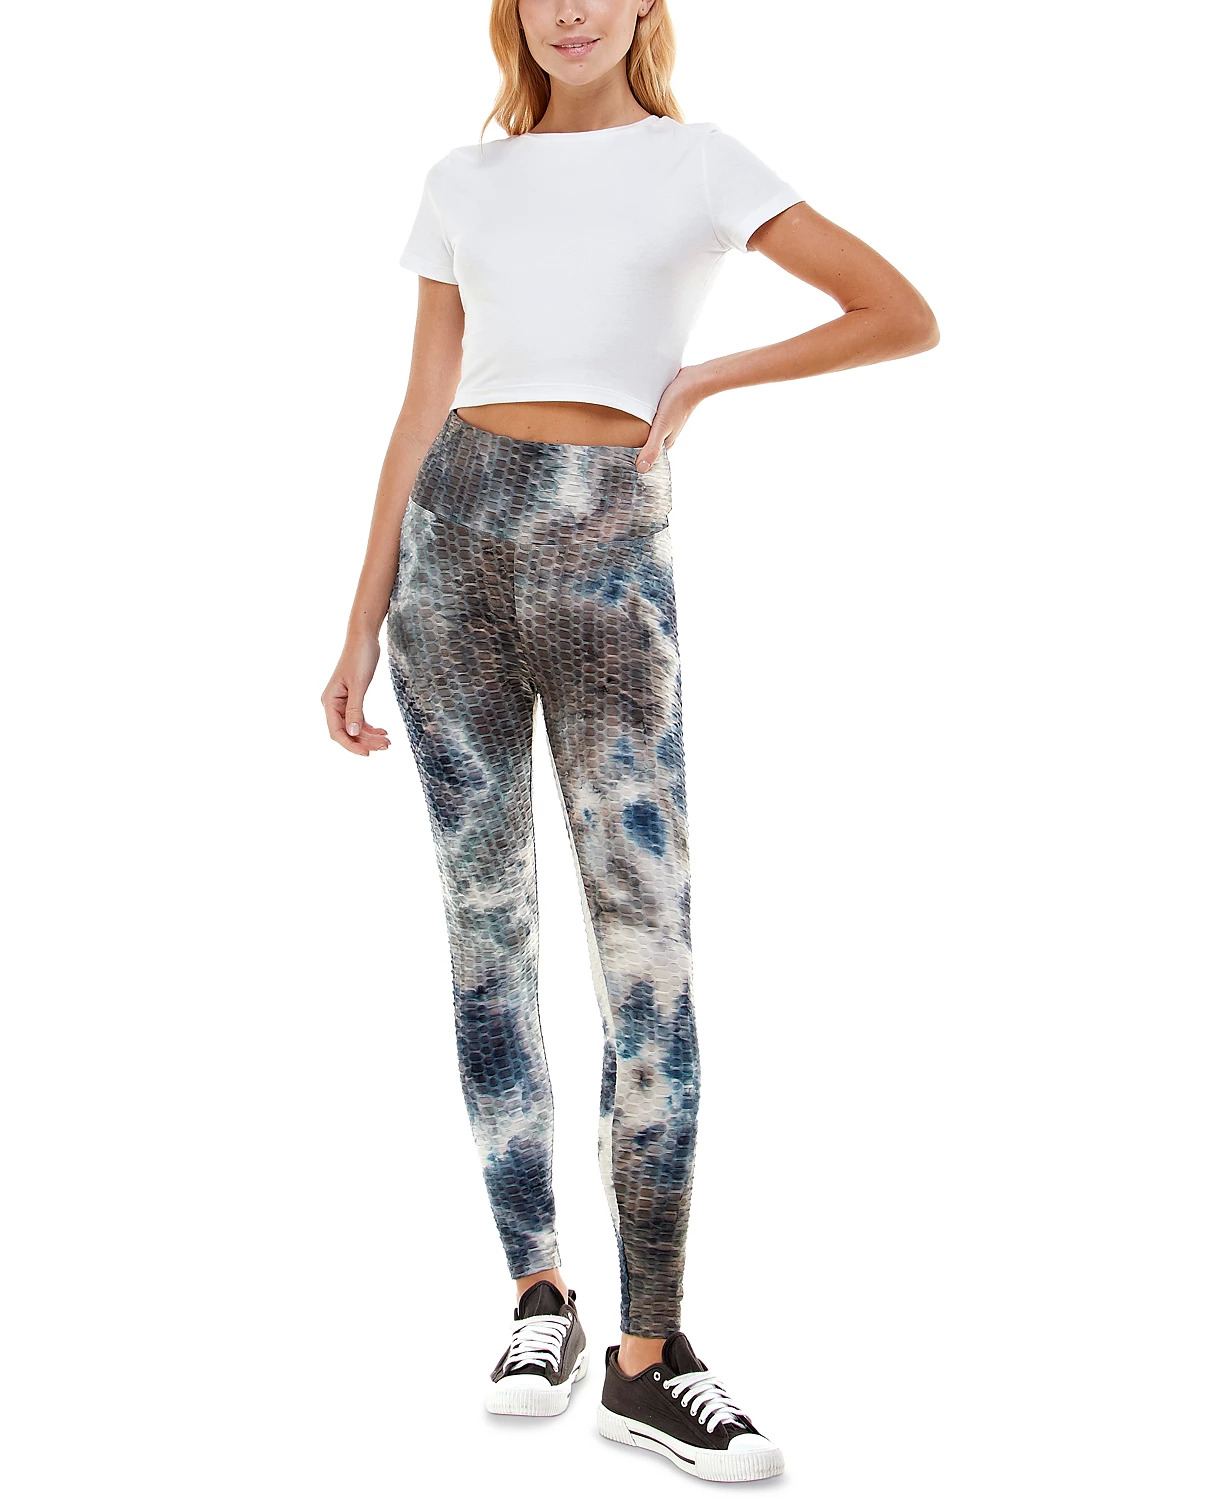 Juniors' Apparel: Ultra Flirt Textured High-Rise Leggings $4, Tinseltown Patch-Pocket Denim Shorts $4.95, More + 15% SD Cashback + Free store pickup at Macy's or FS on $25+